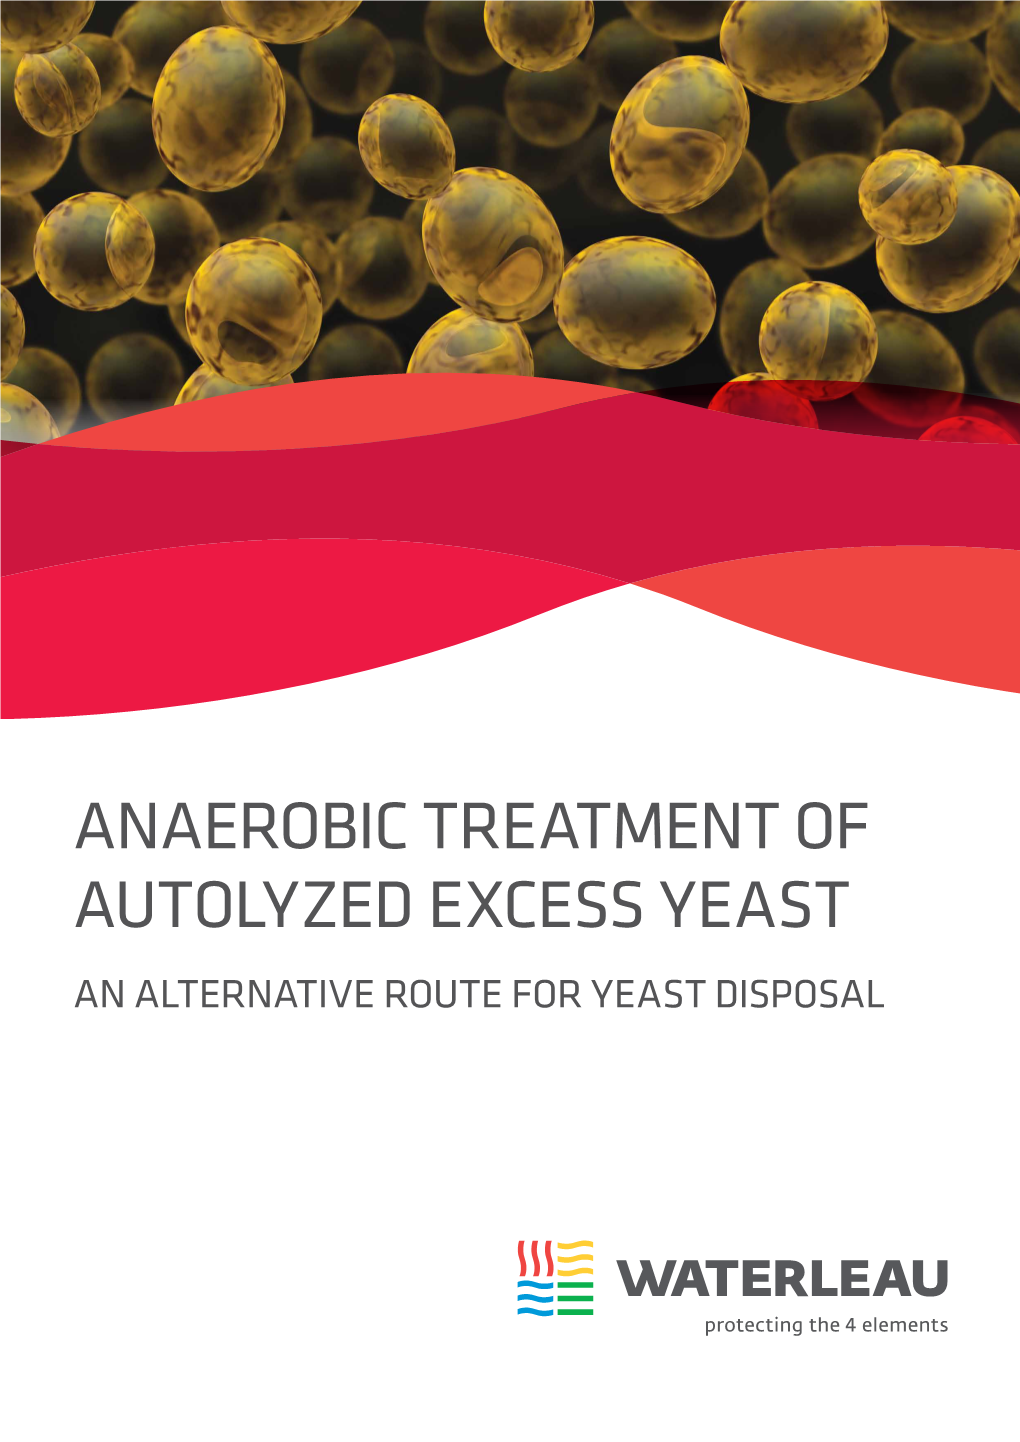 Anaerobic Treatment of Autolyzed Excess Yeast an Alternative Route for Yeast Disposal an Alternative Route for Yeast Disposal